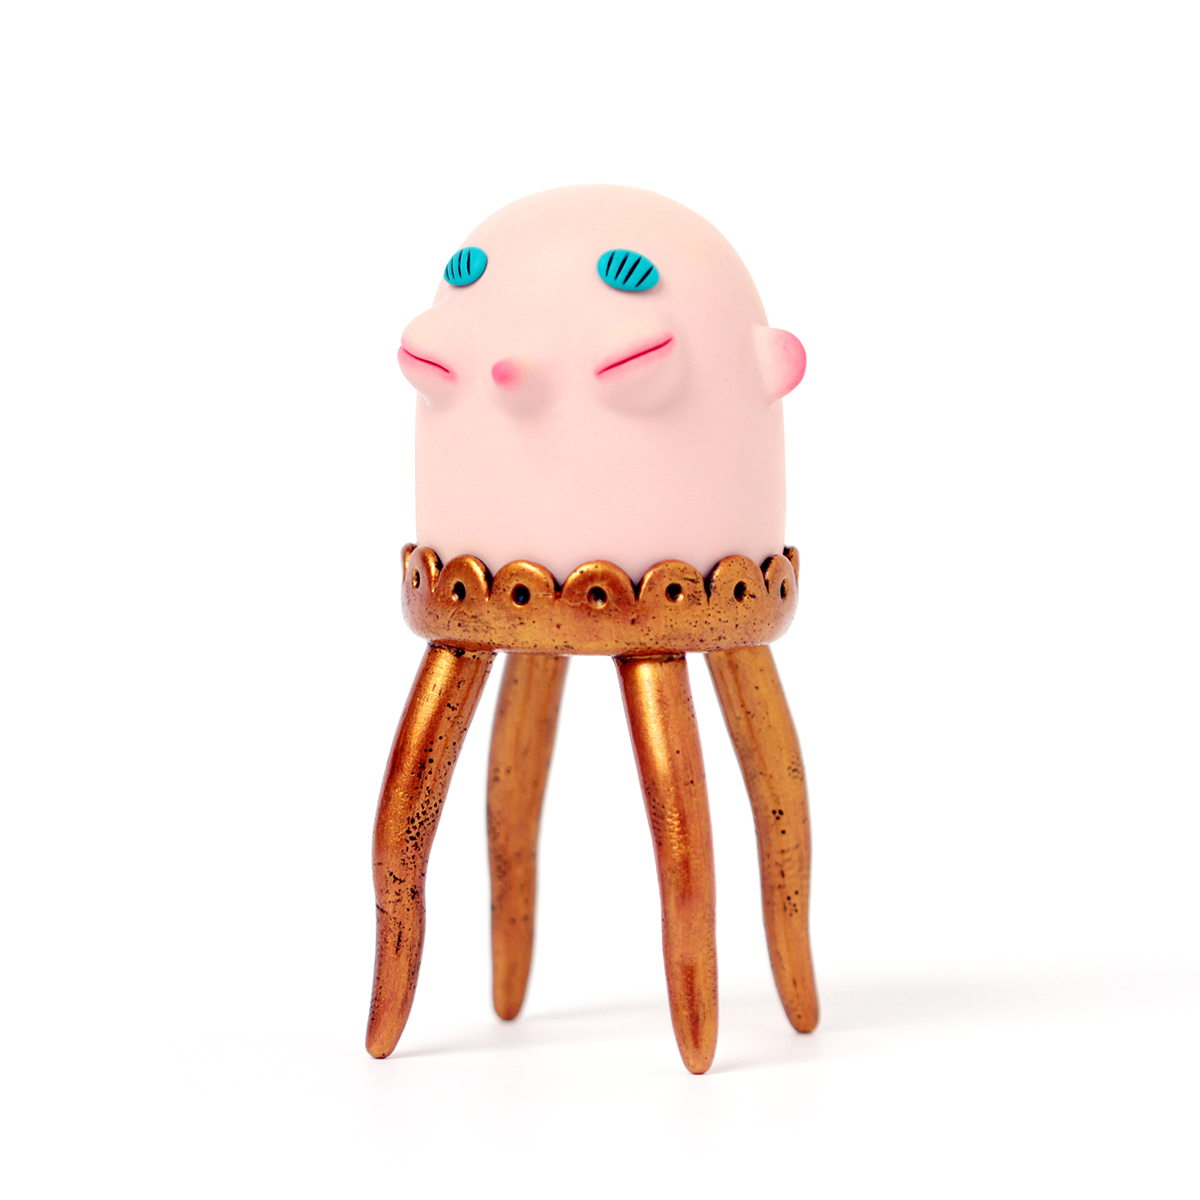 Polymer clay sculpture of a bald head with golden legs